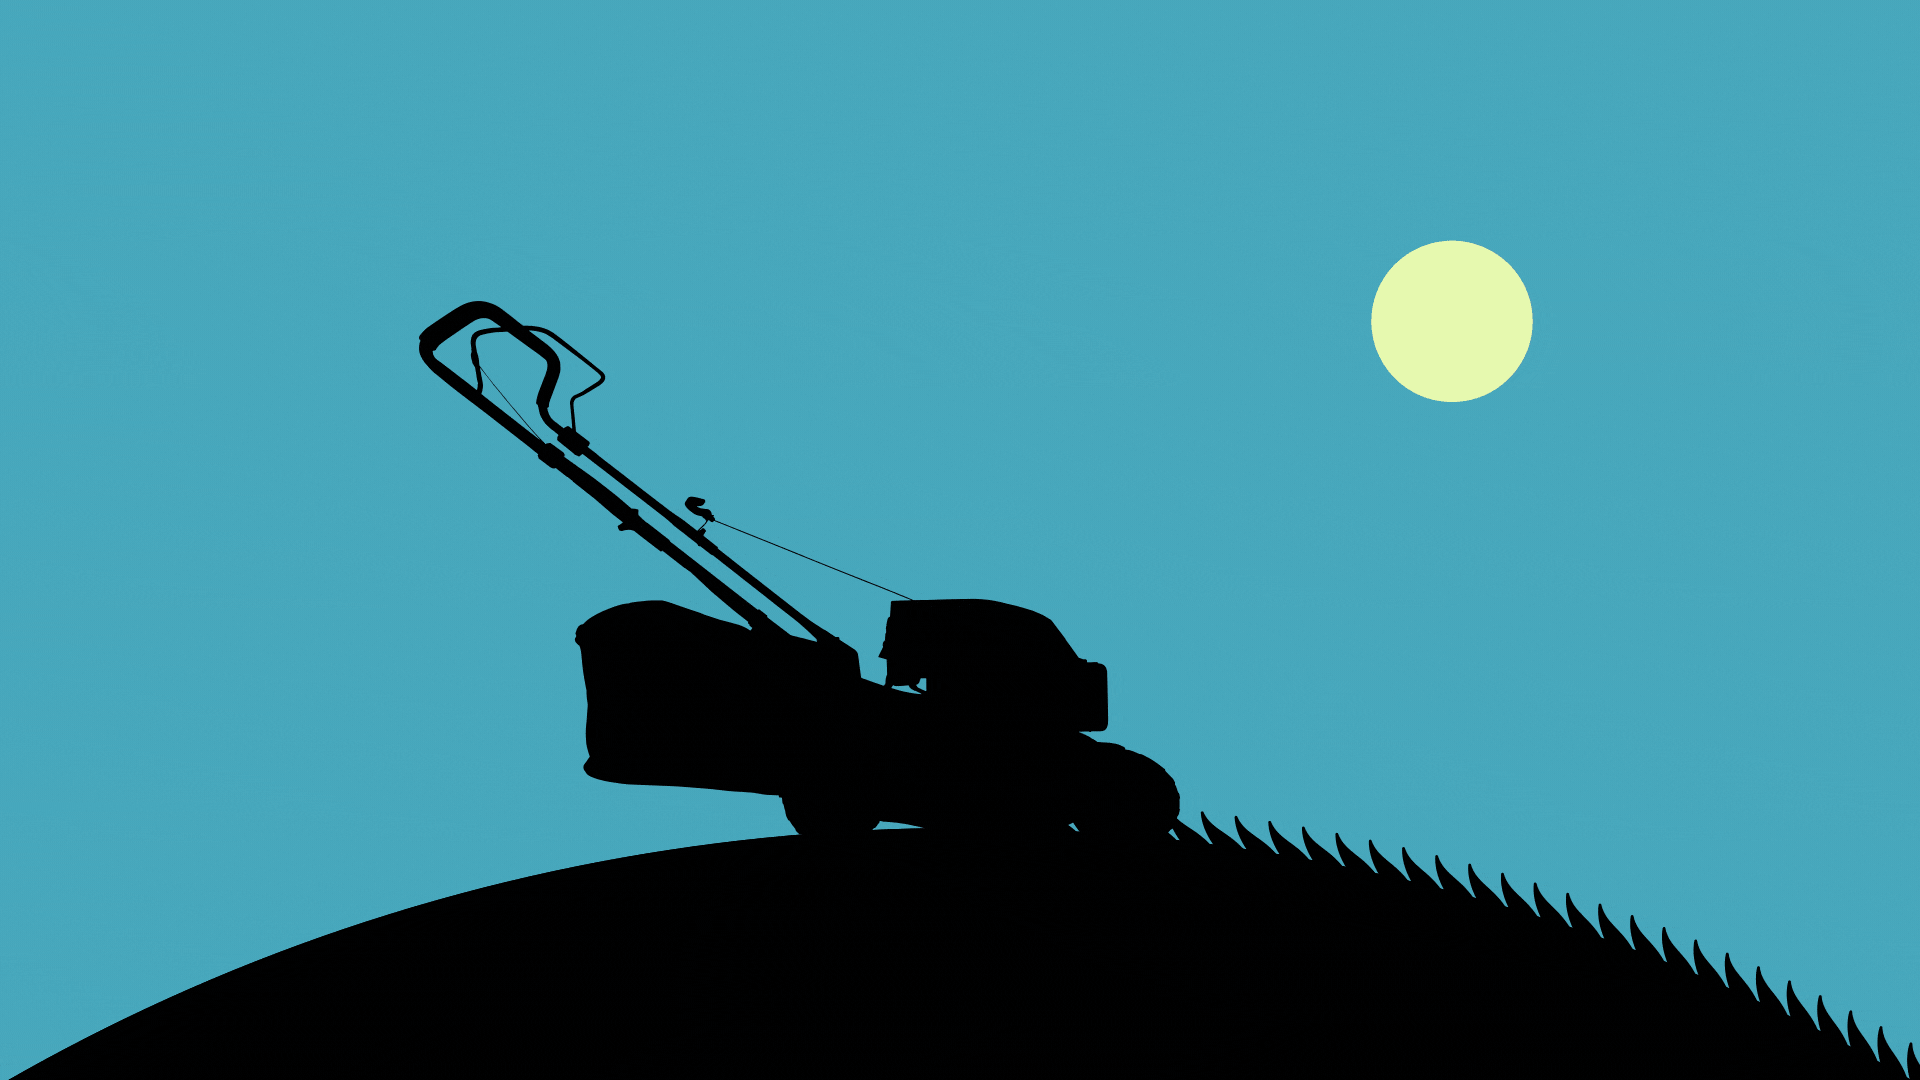 Illustration of a lawnmower cutting grass as the day turns to night and back.